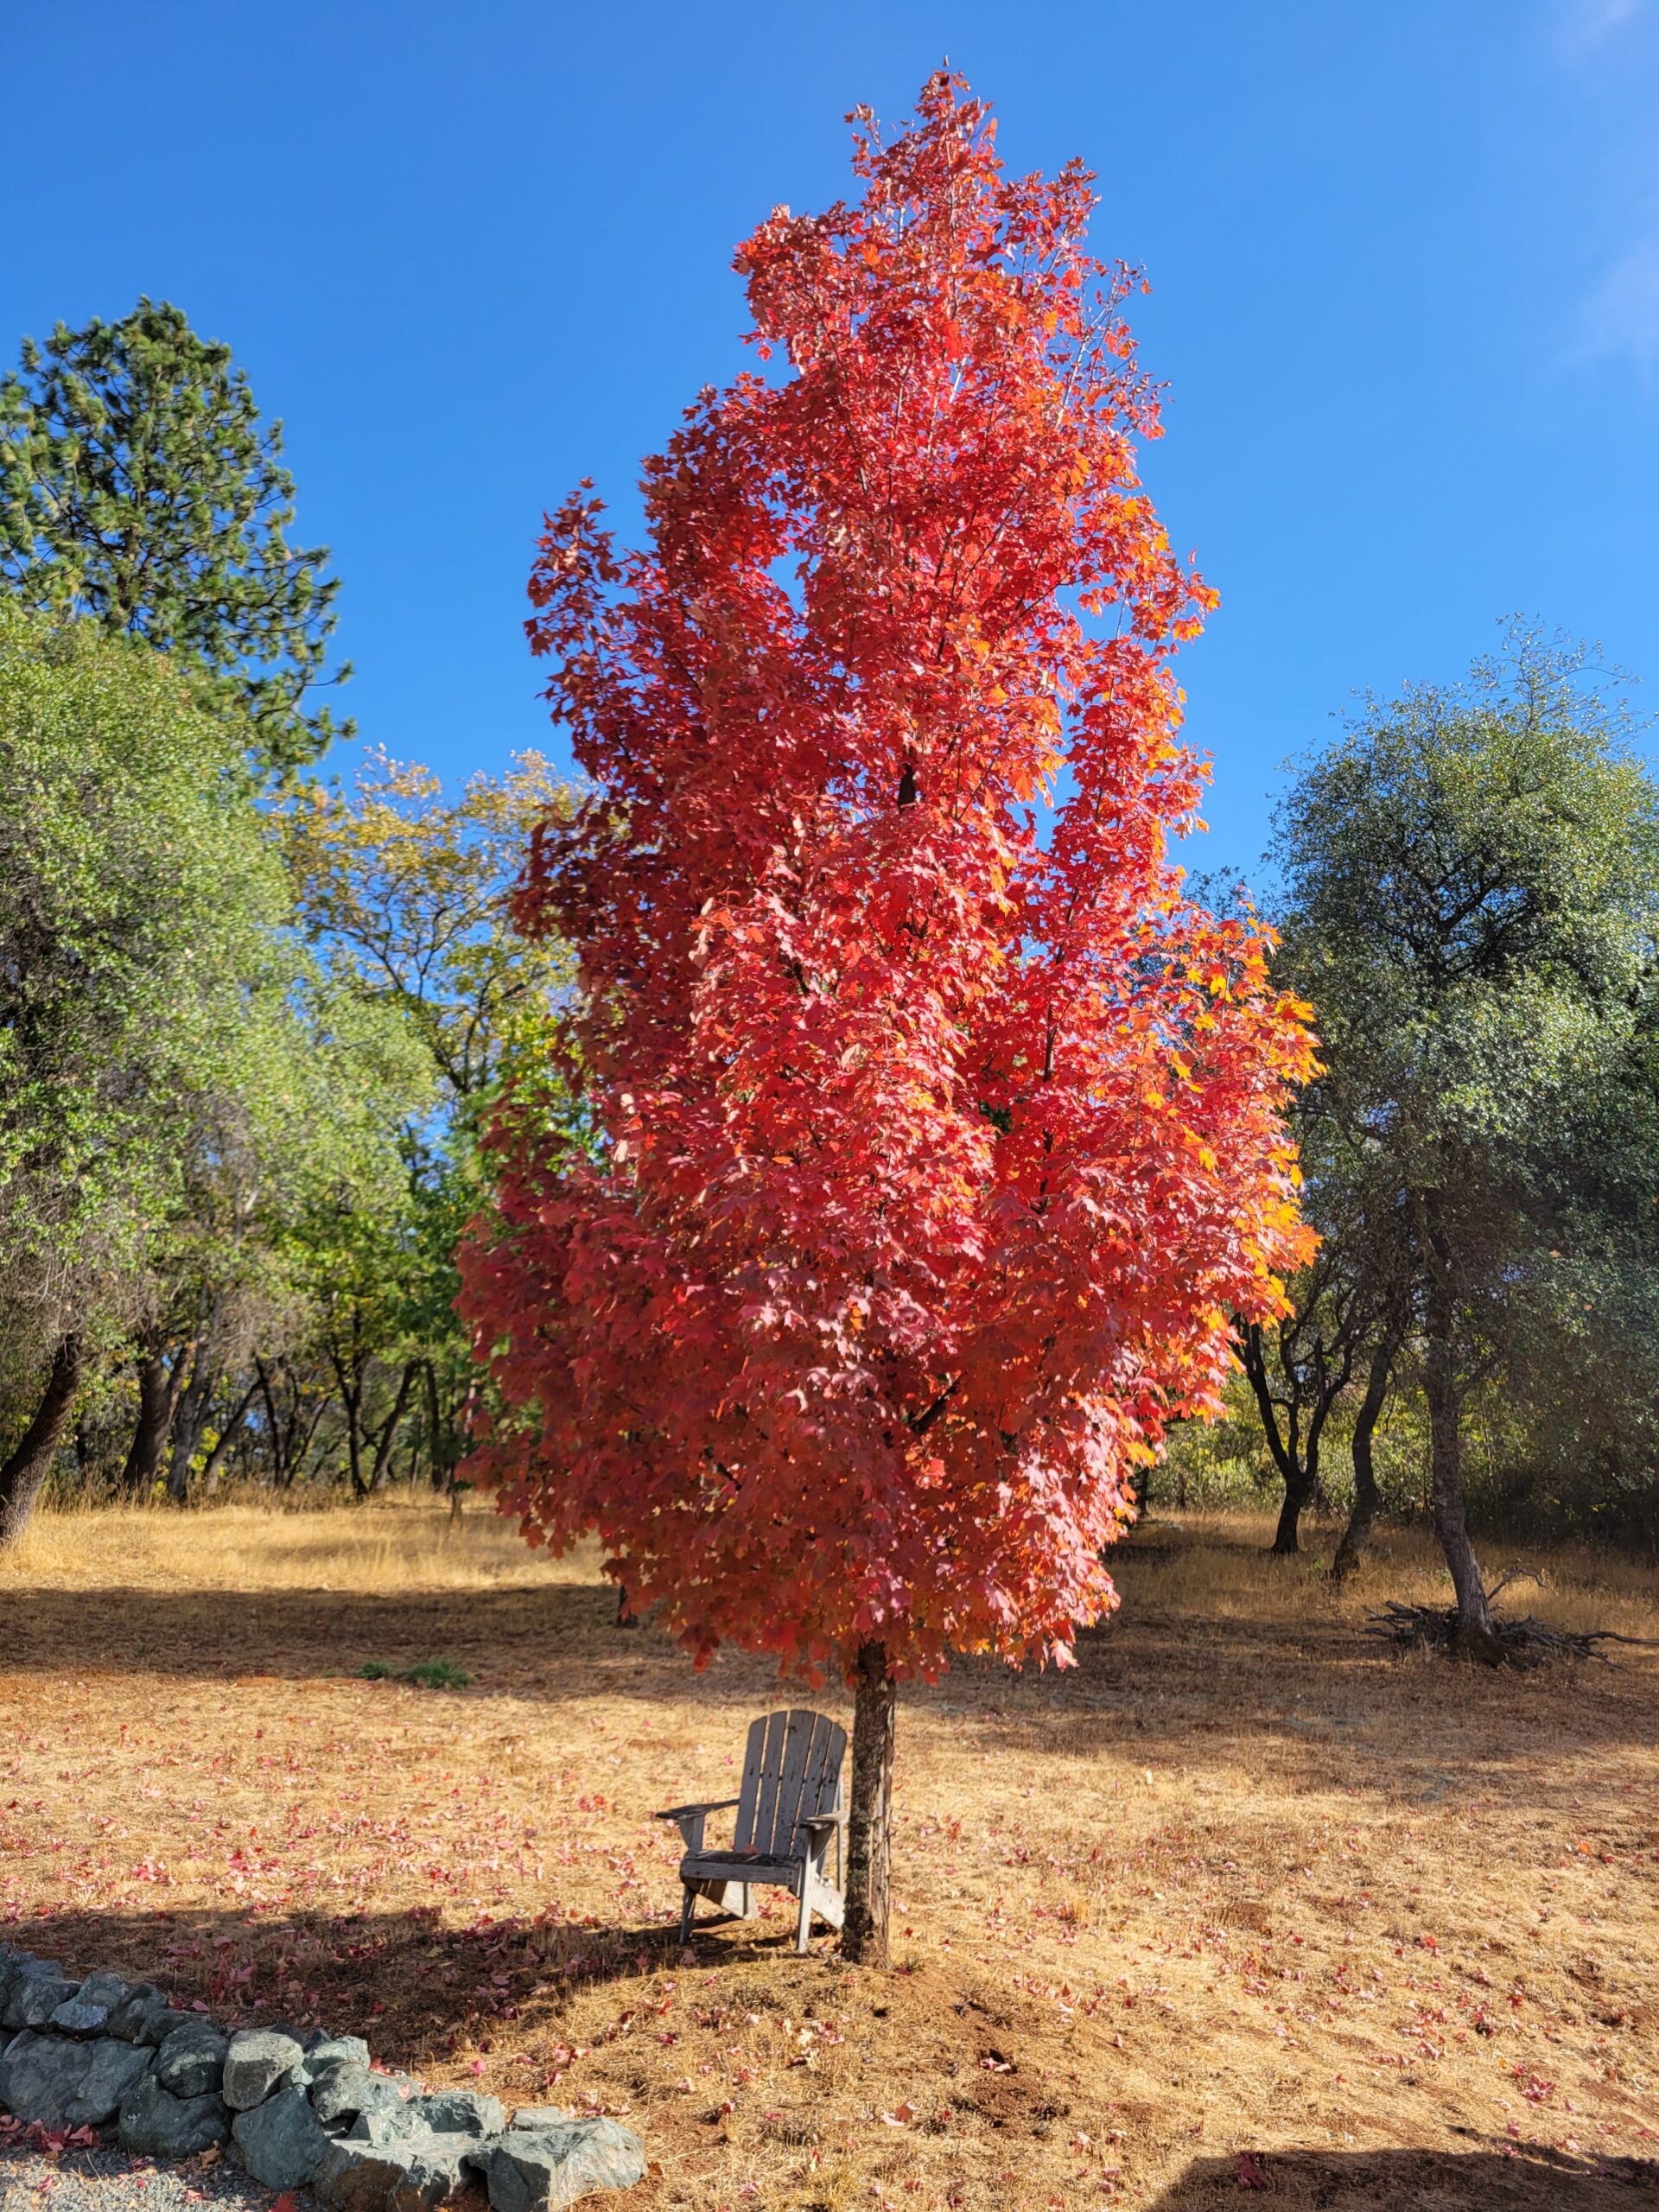 tree-fall-colors-with-seat